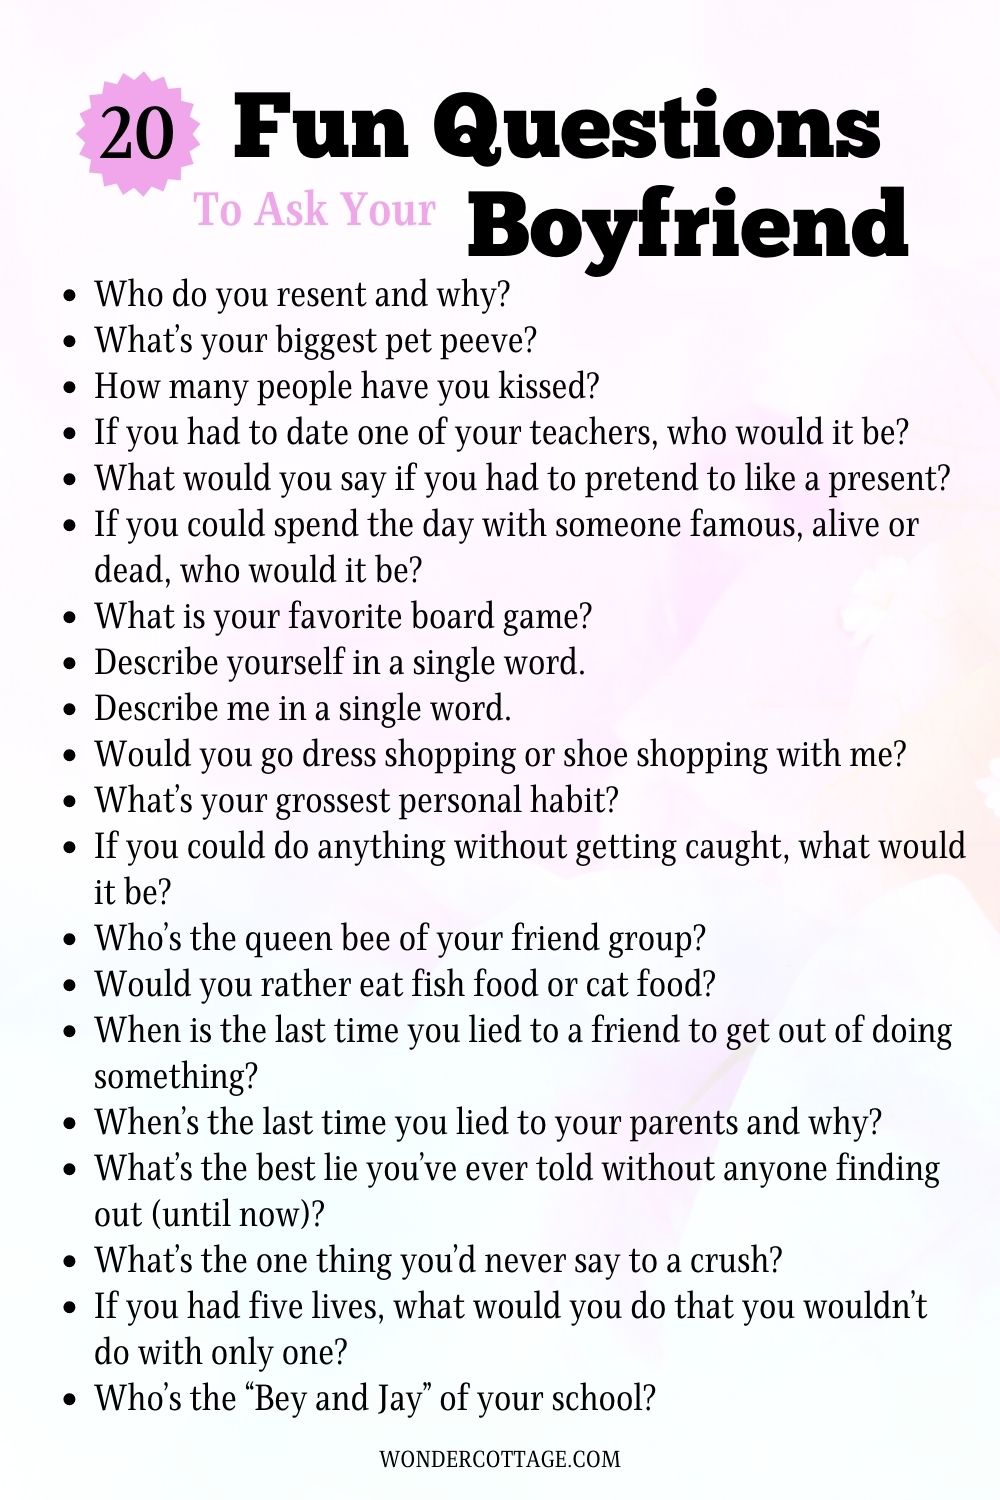 20 Fun questions to ask your boyfriend